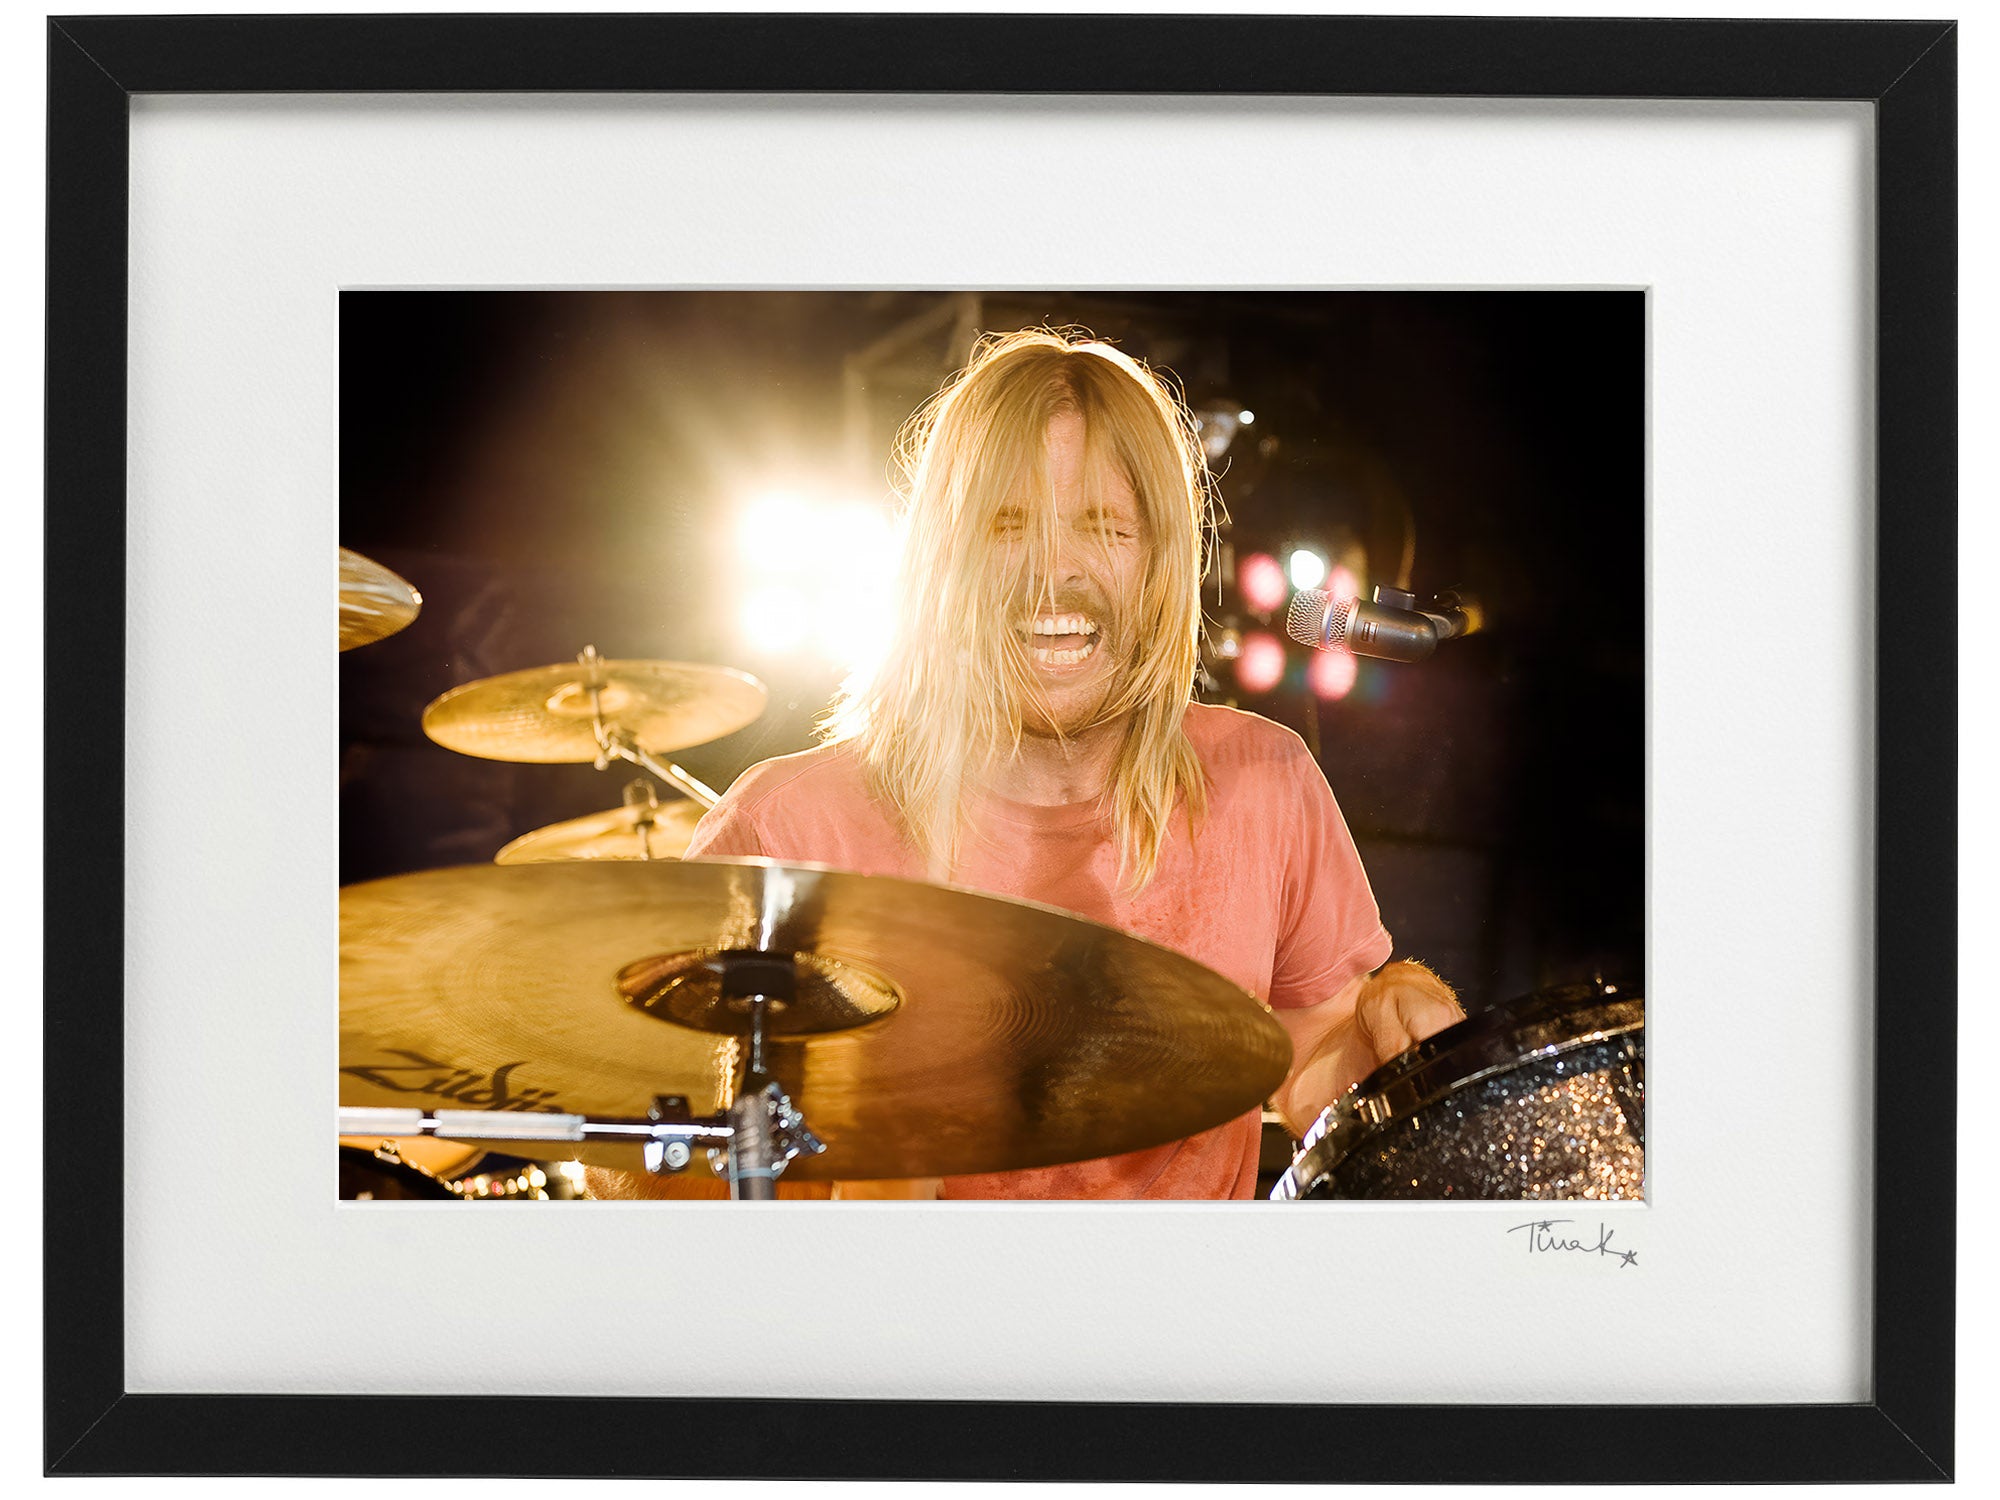 Taylor Hawkins playing drums onstage at Download festival 2010 with Taylor Hawkins And The Coattail Riders. Framed  print by Tina K Photography